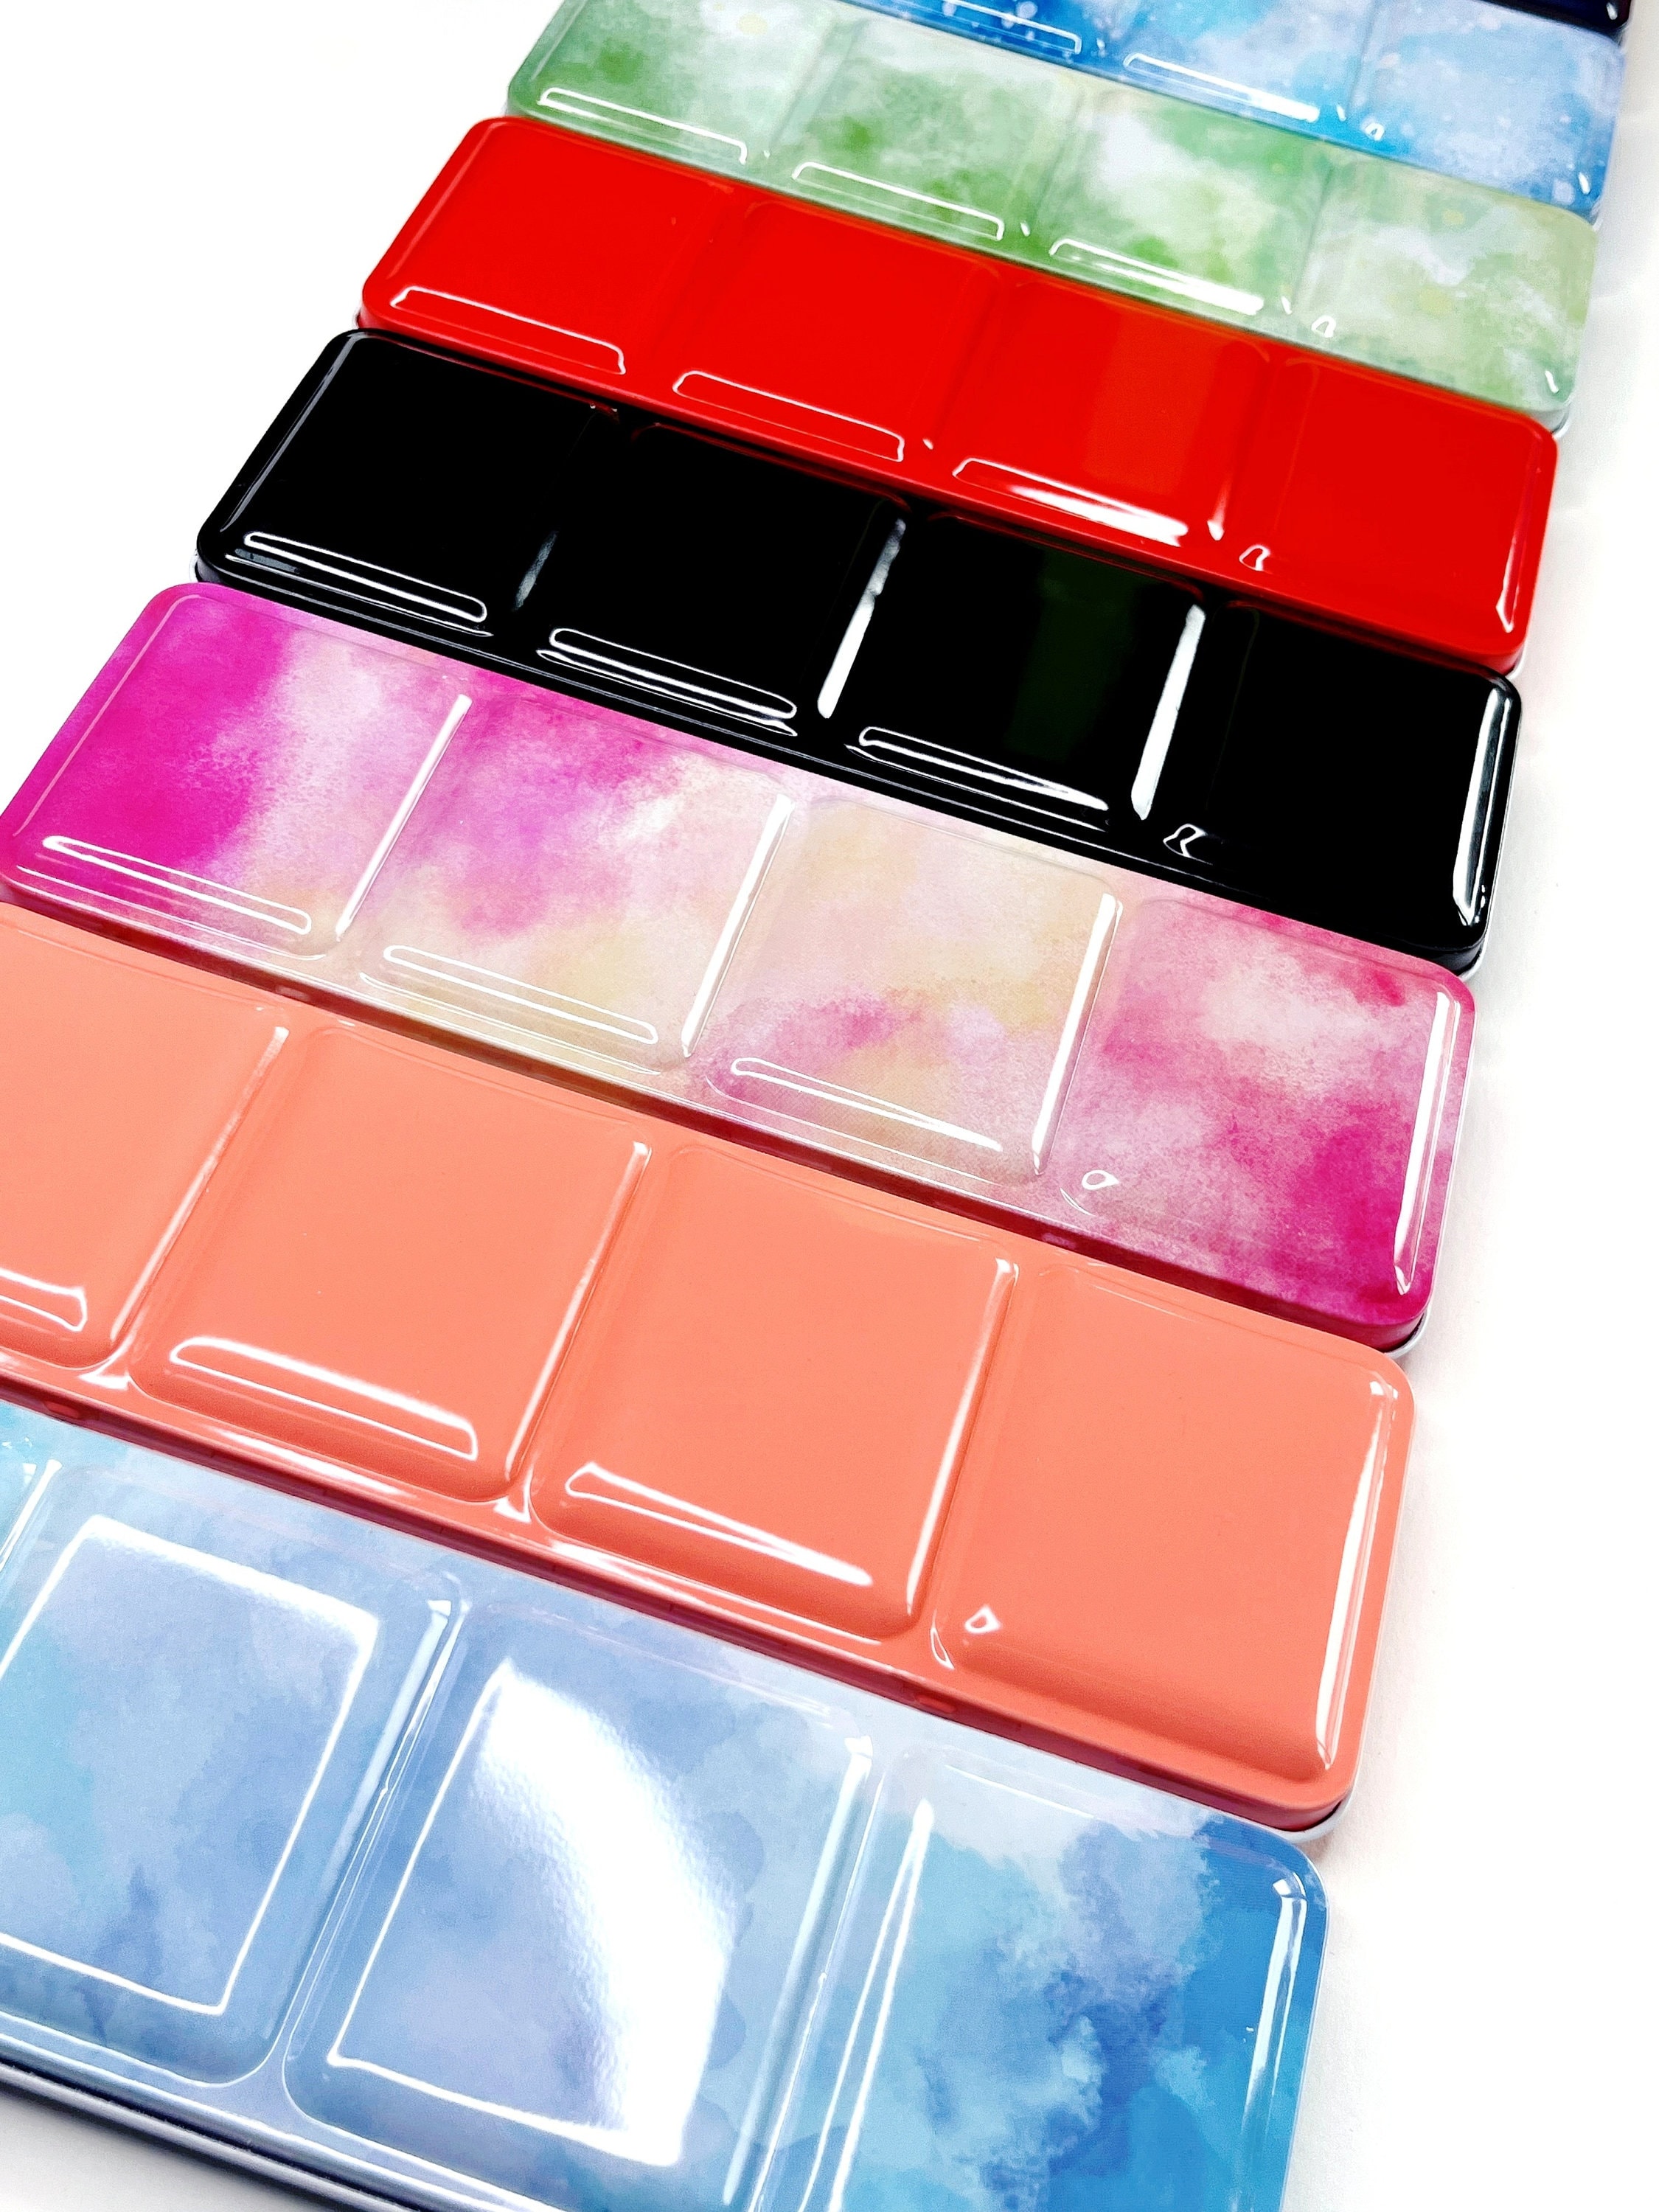 50 Half Pan Empty Watercolor Palette Tin, 7x4.25, Perfect for